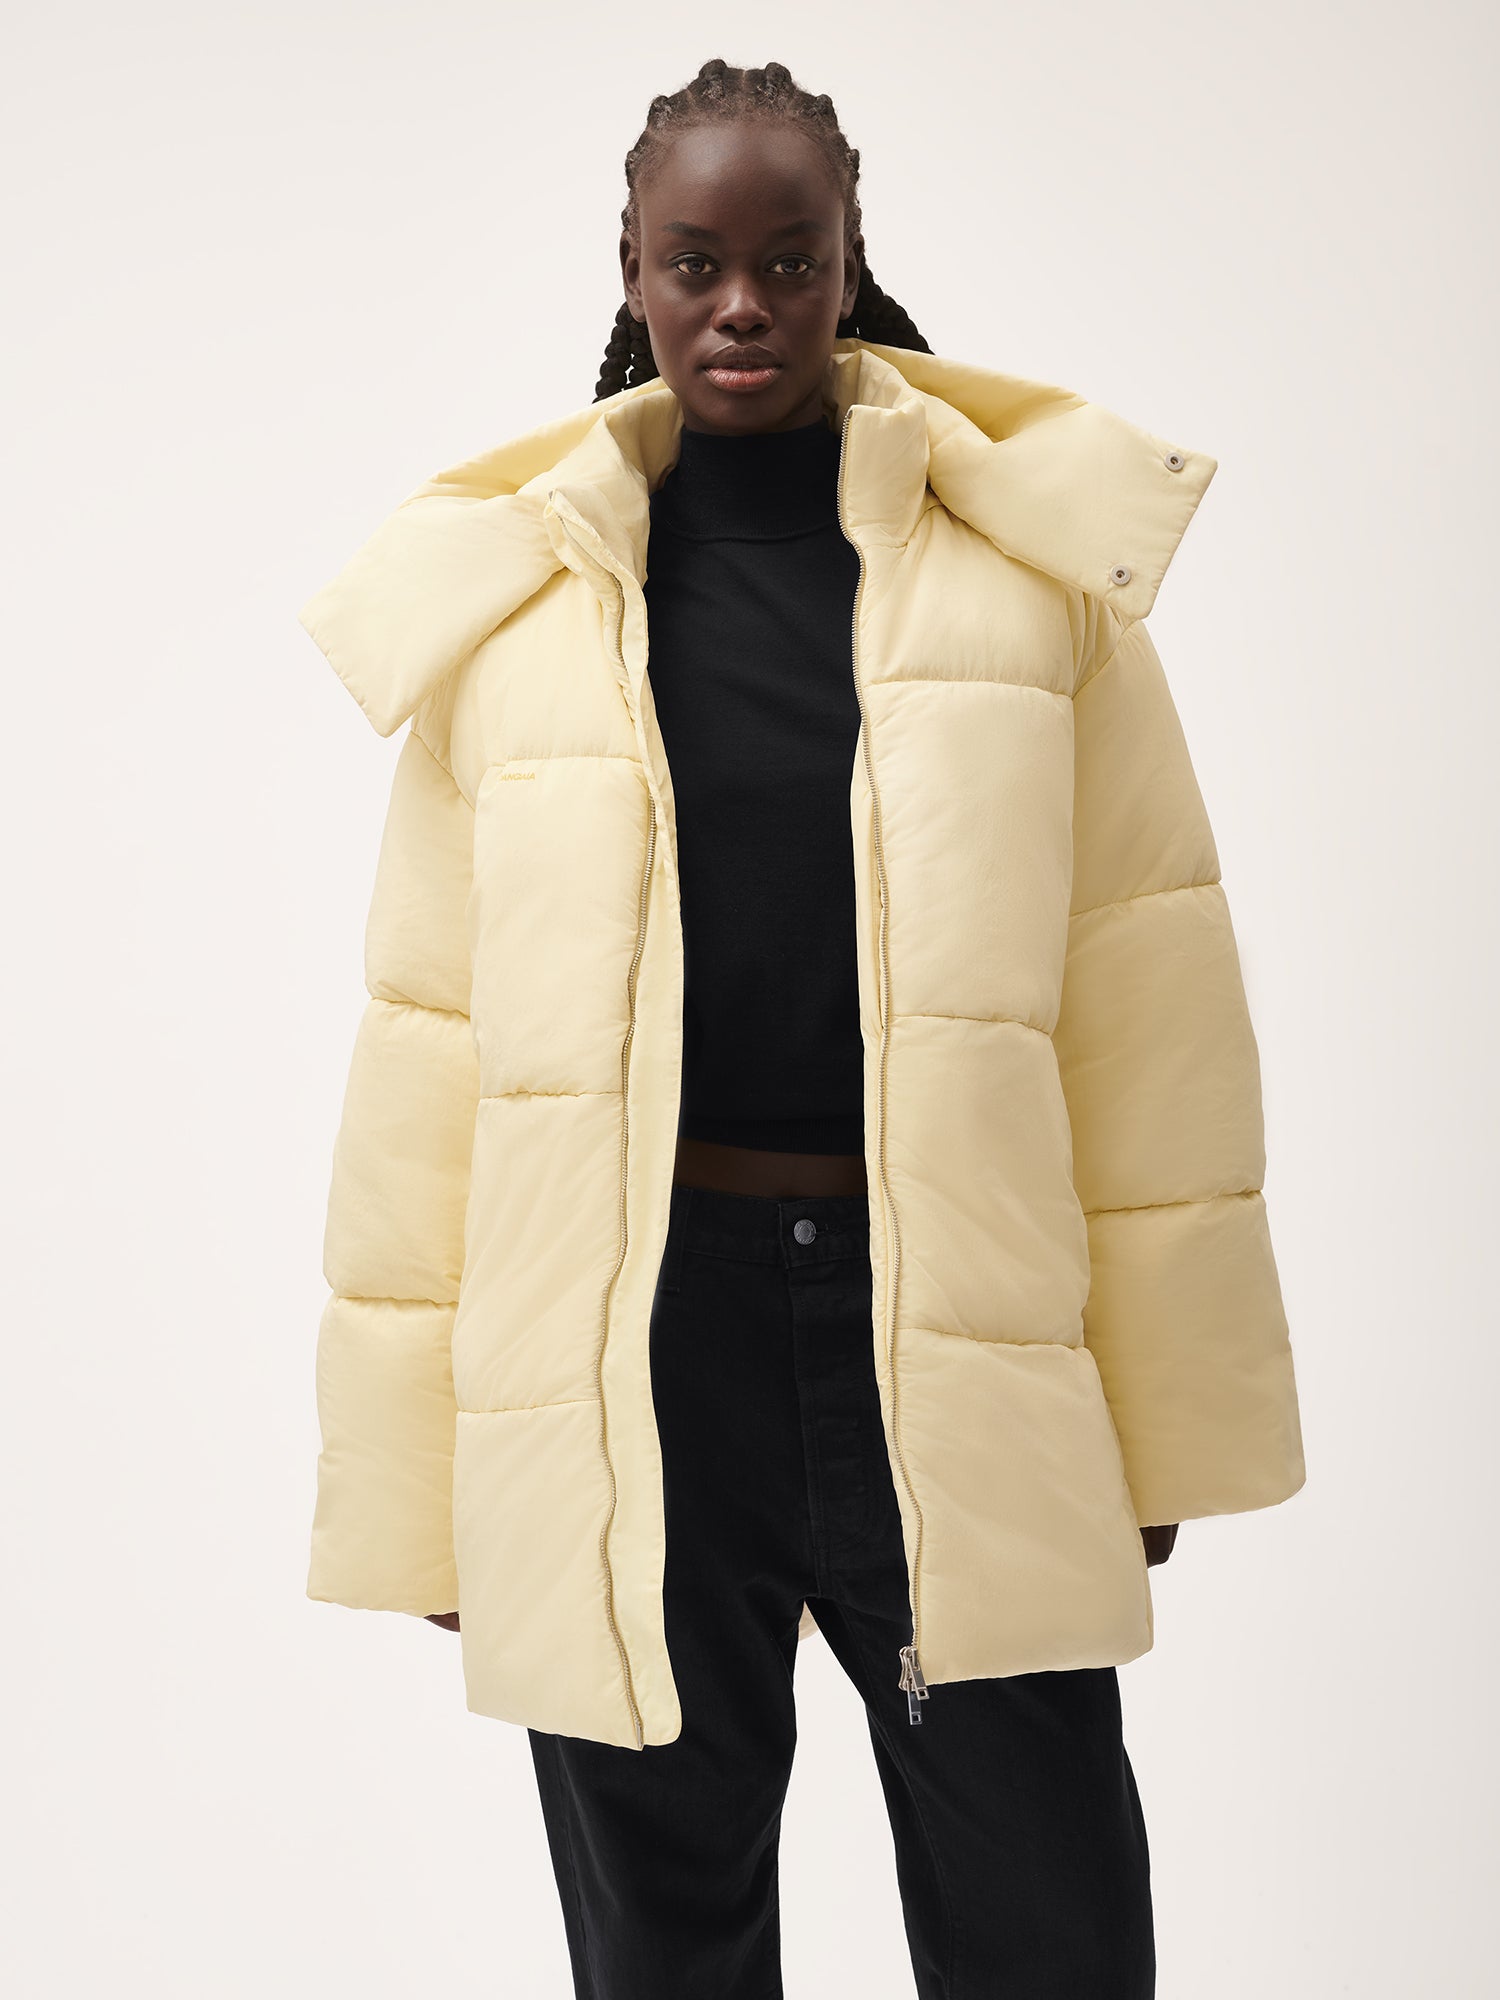 FLWRDWN_Recycle_Nylon_Exaggerated_Long_Puffer_Rind_Yellow_female-1